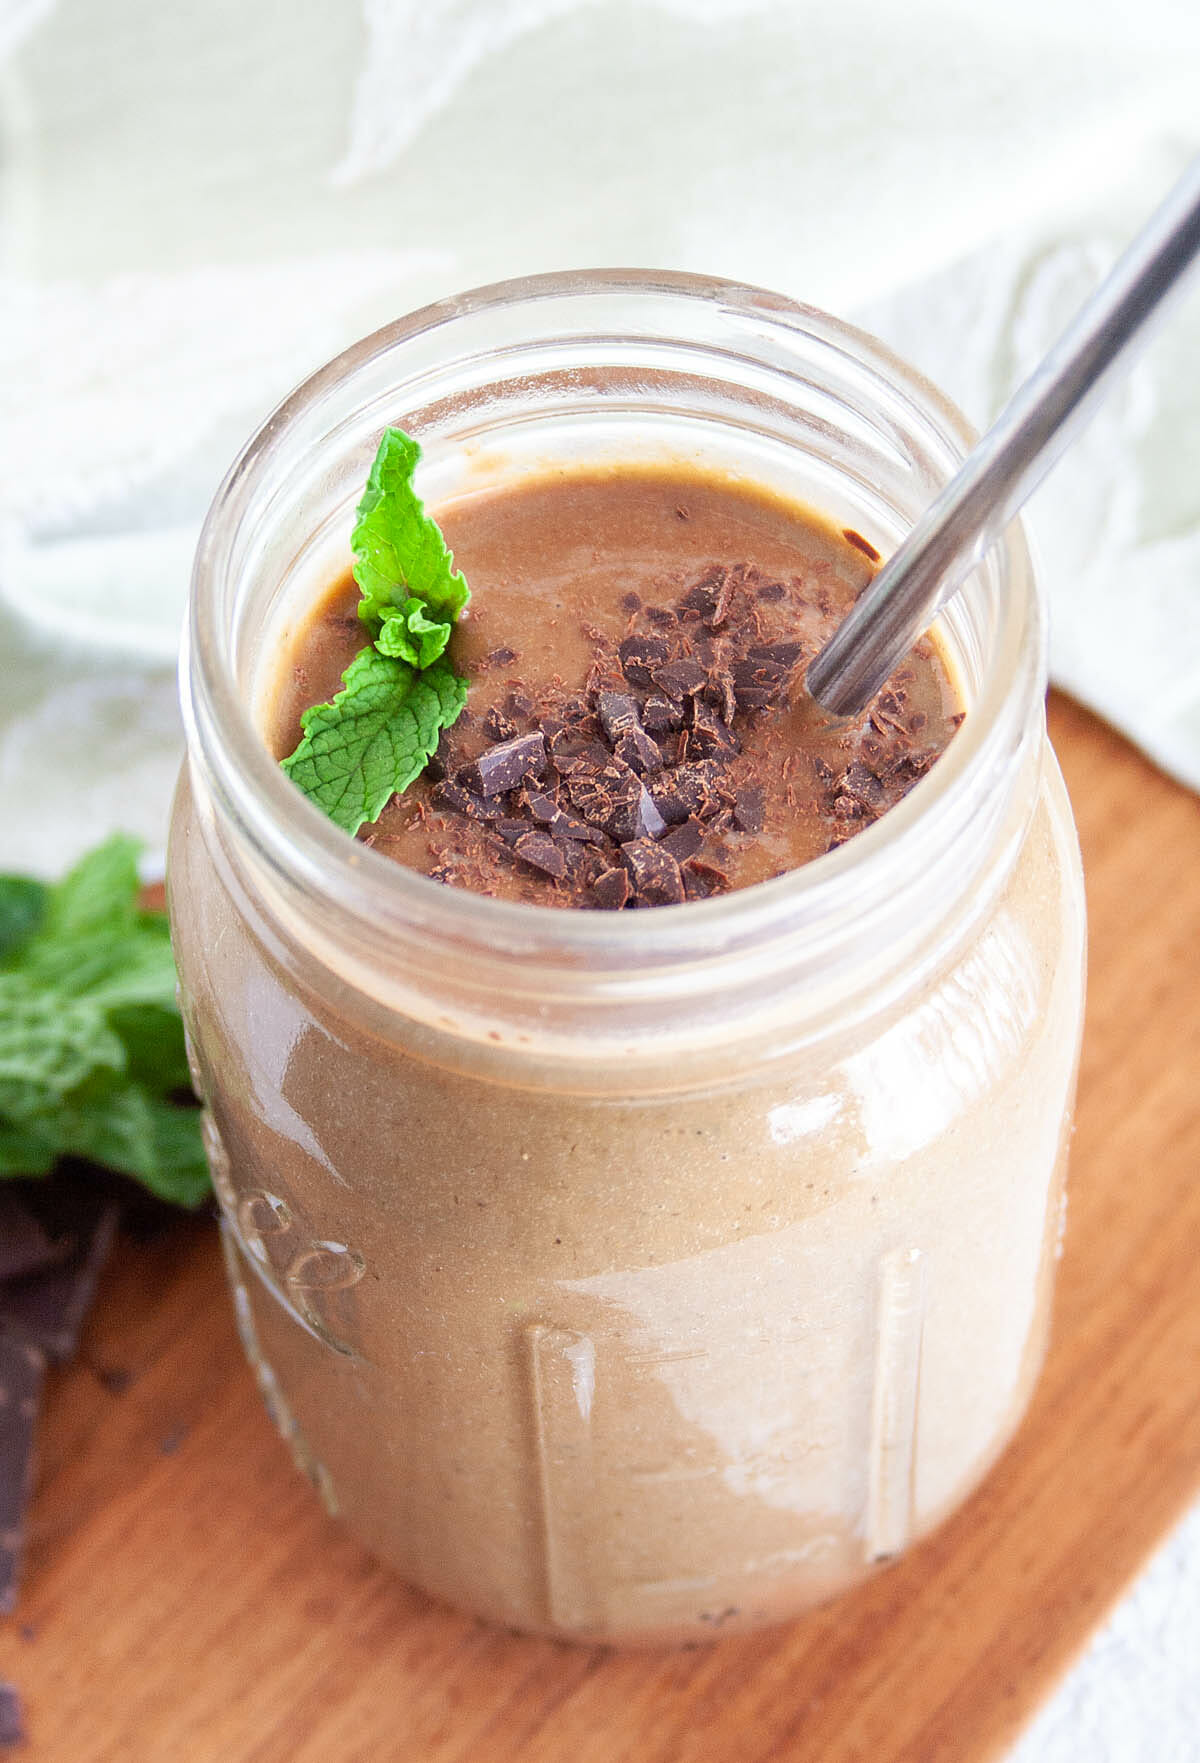 Mint Chocolate Chip Smoothie with mint leaves and chopped dark chocolate.